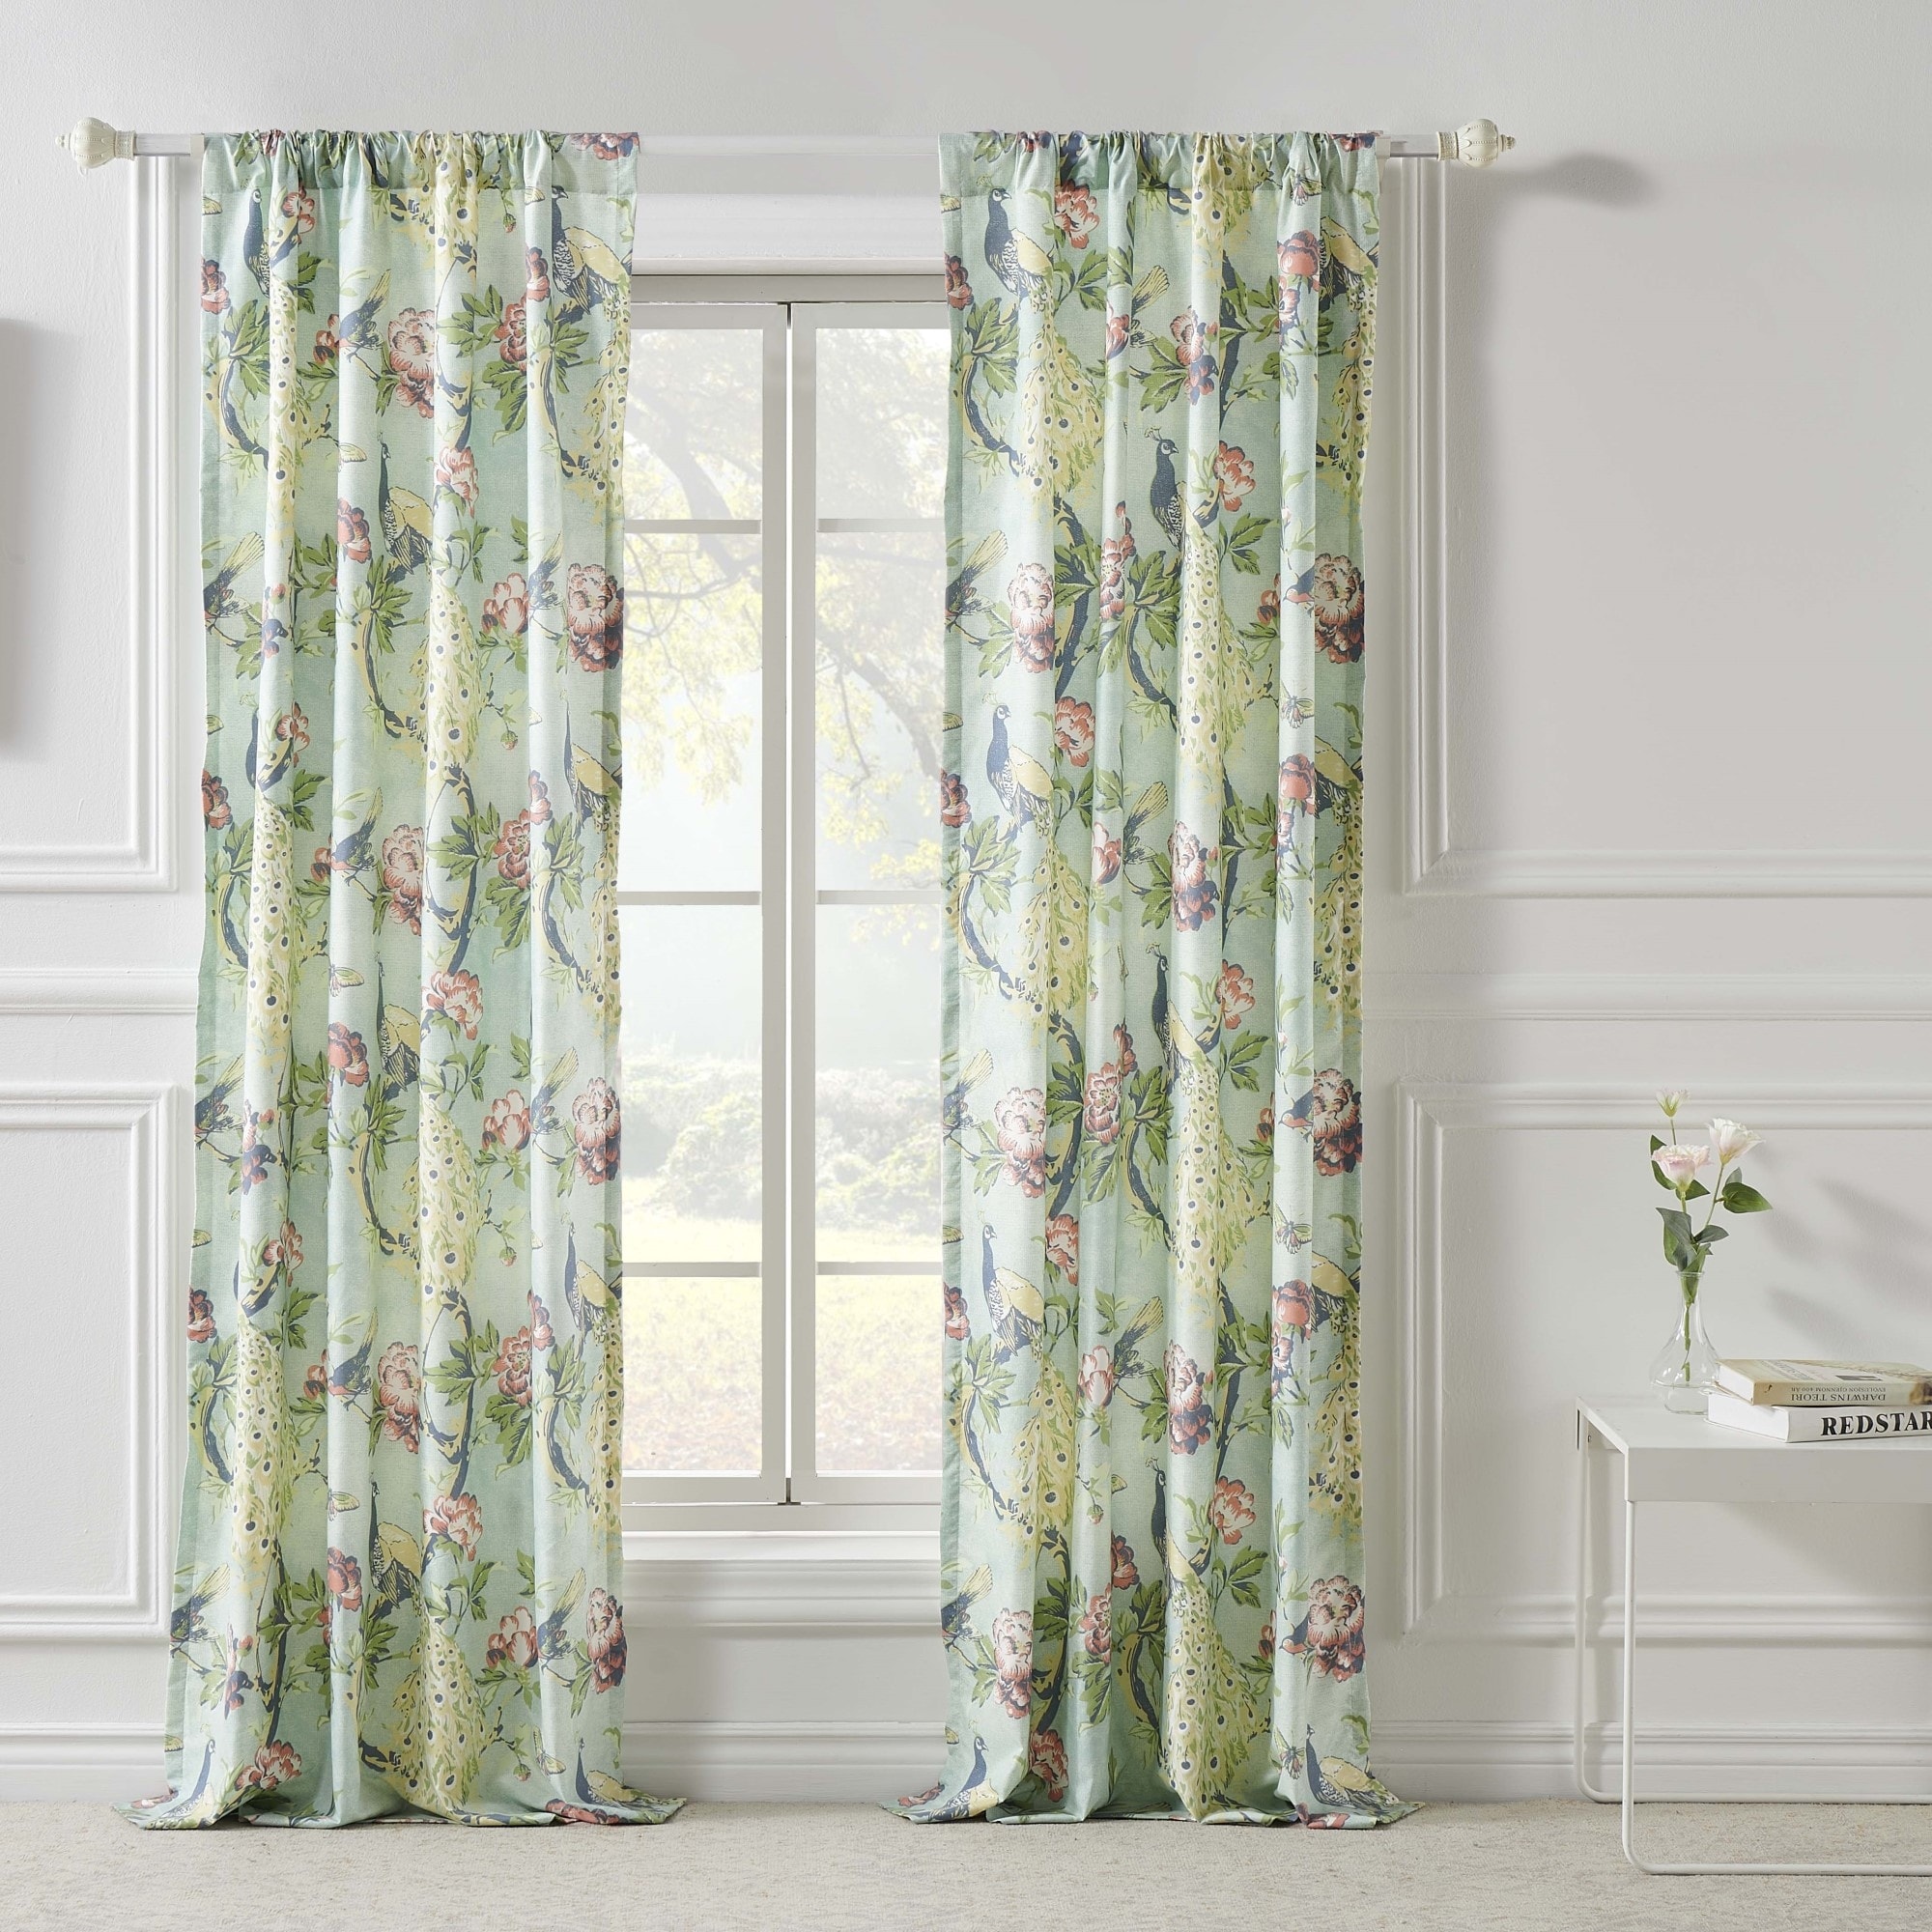 Greenland Home Fashions Pavona Peacock 84-inch Curtain Panels (Set of 2)